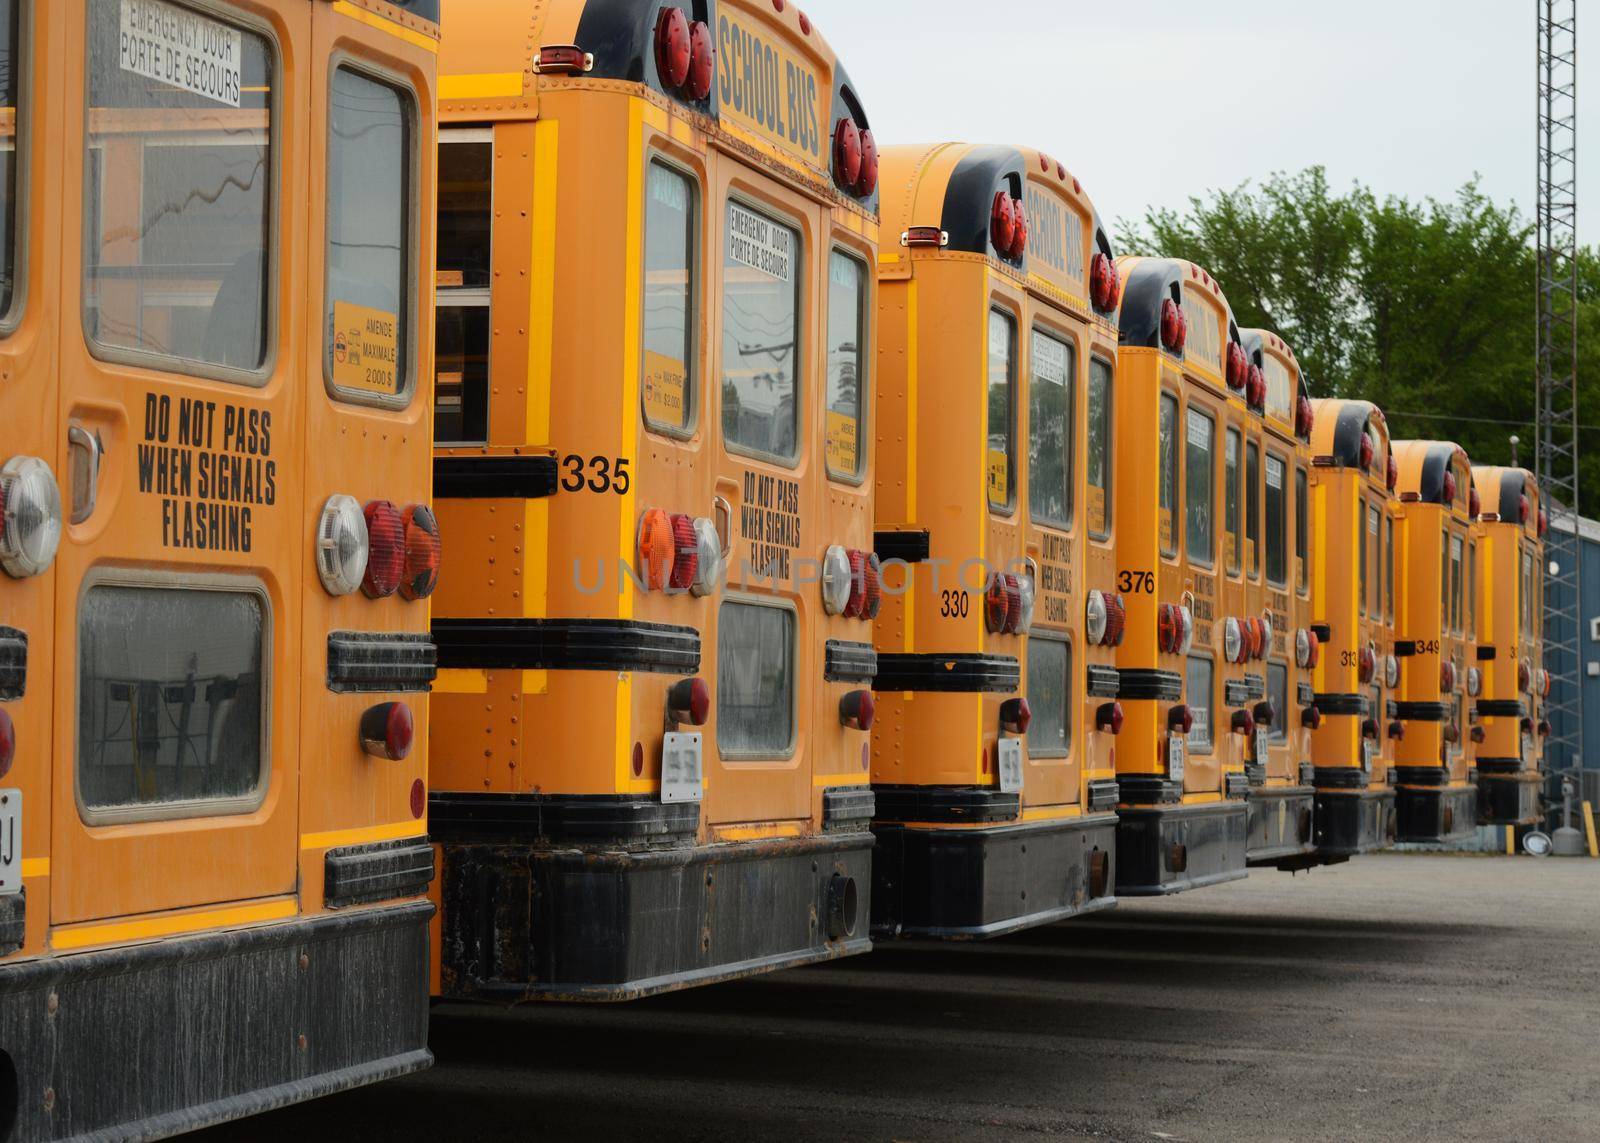 Parked School Buses by AlphaBaby